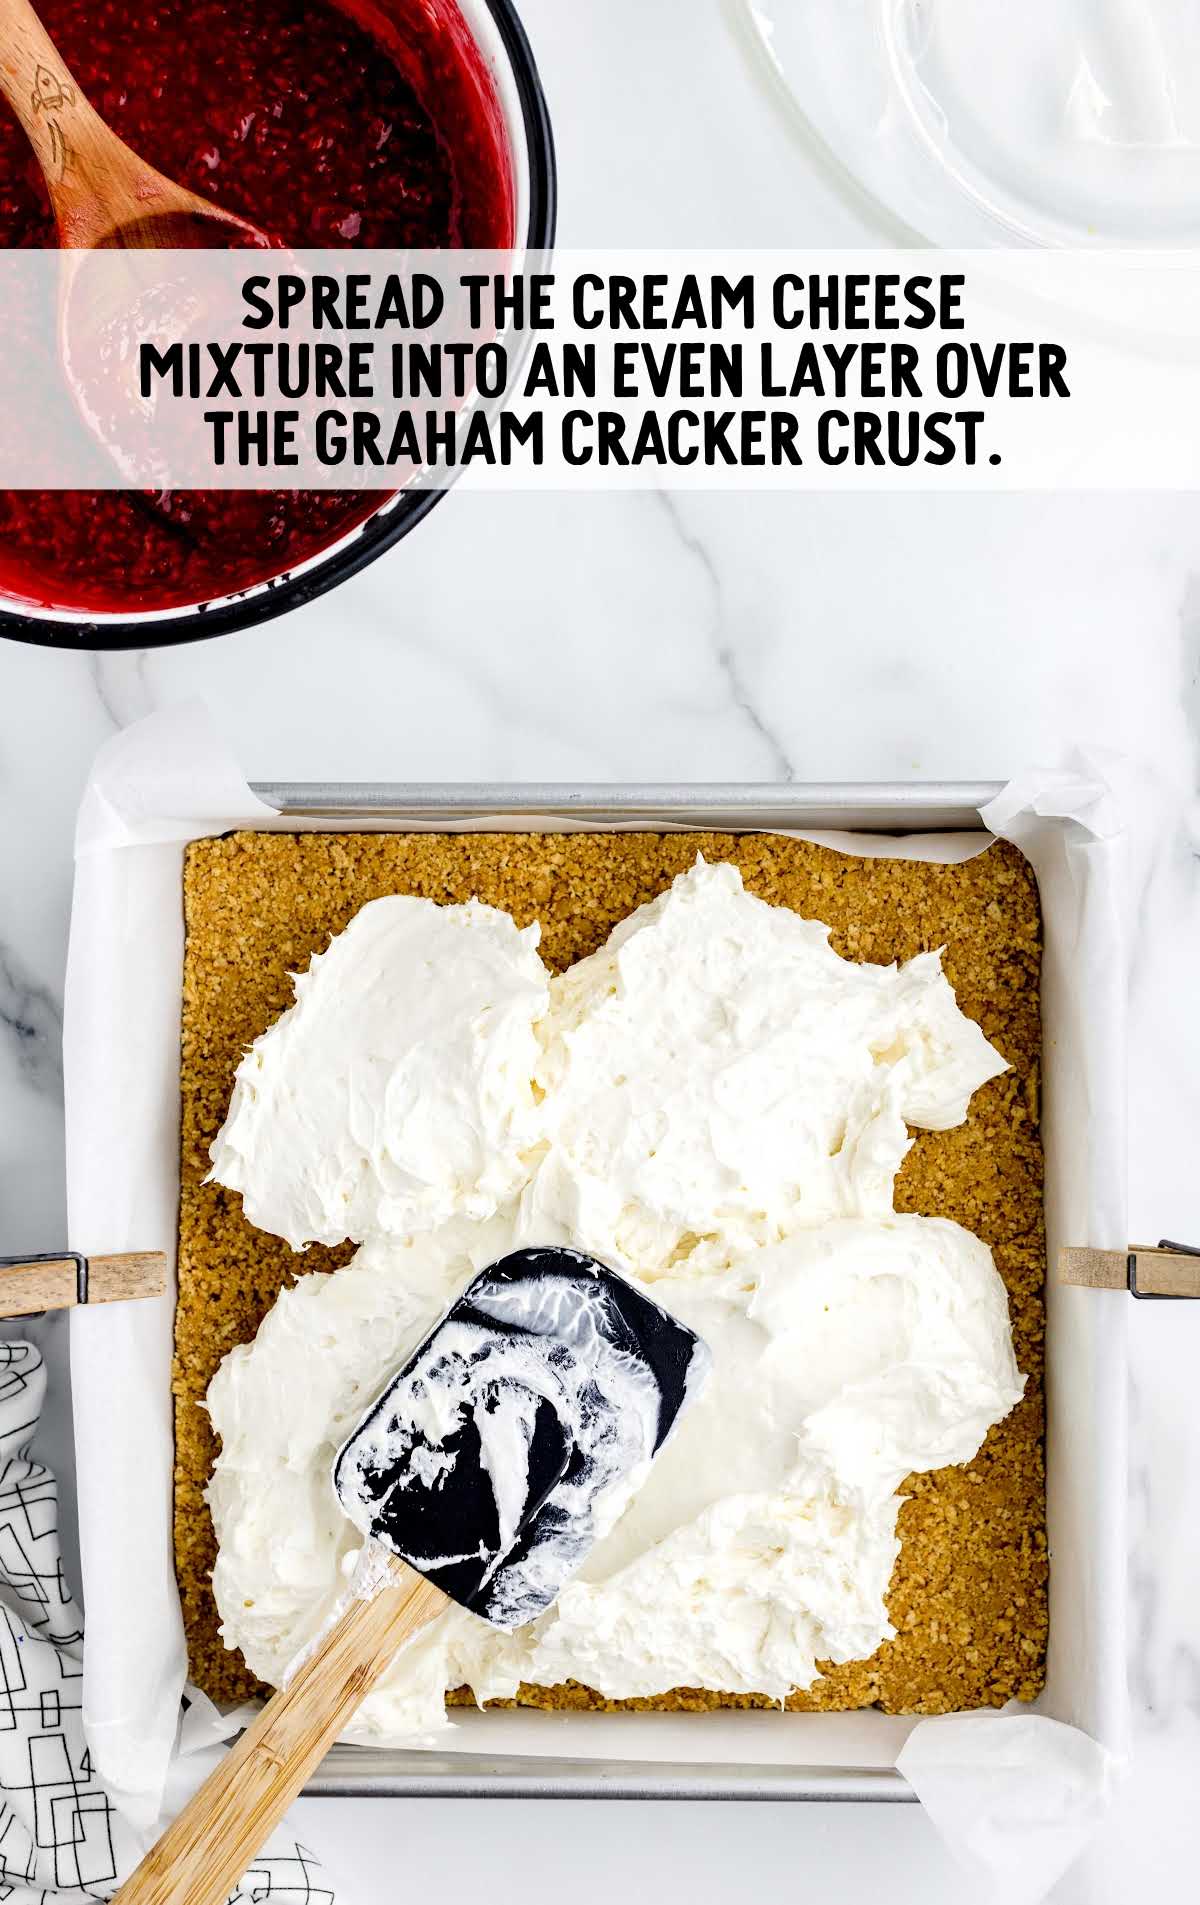 cream cheese mixture spread into the even layer over the graham cracker crust in a baking dish